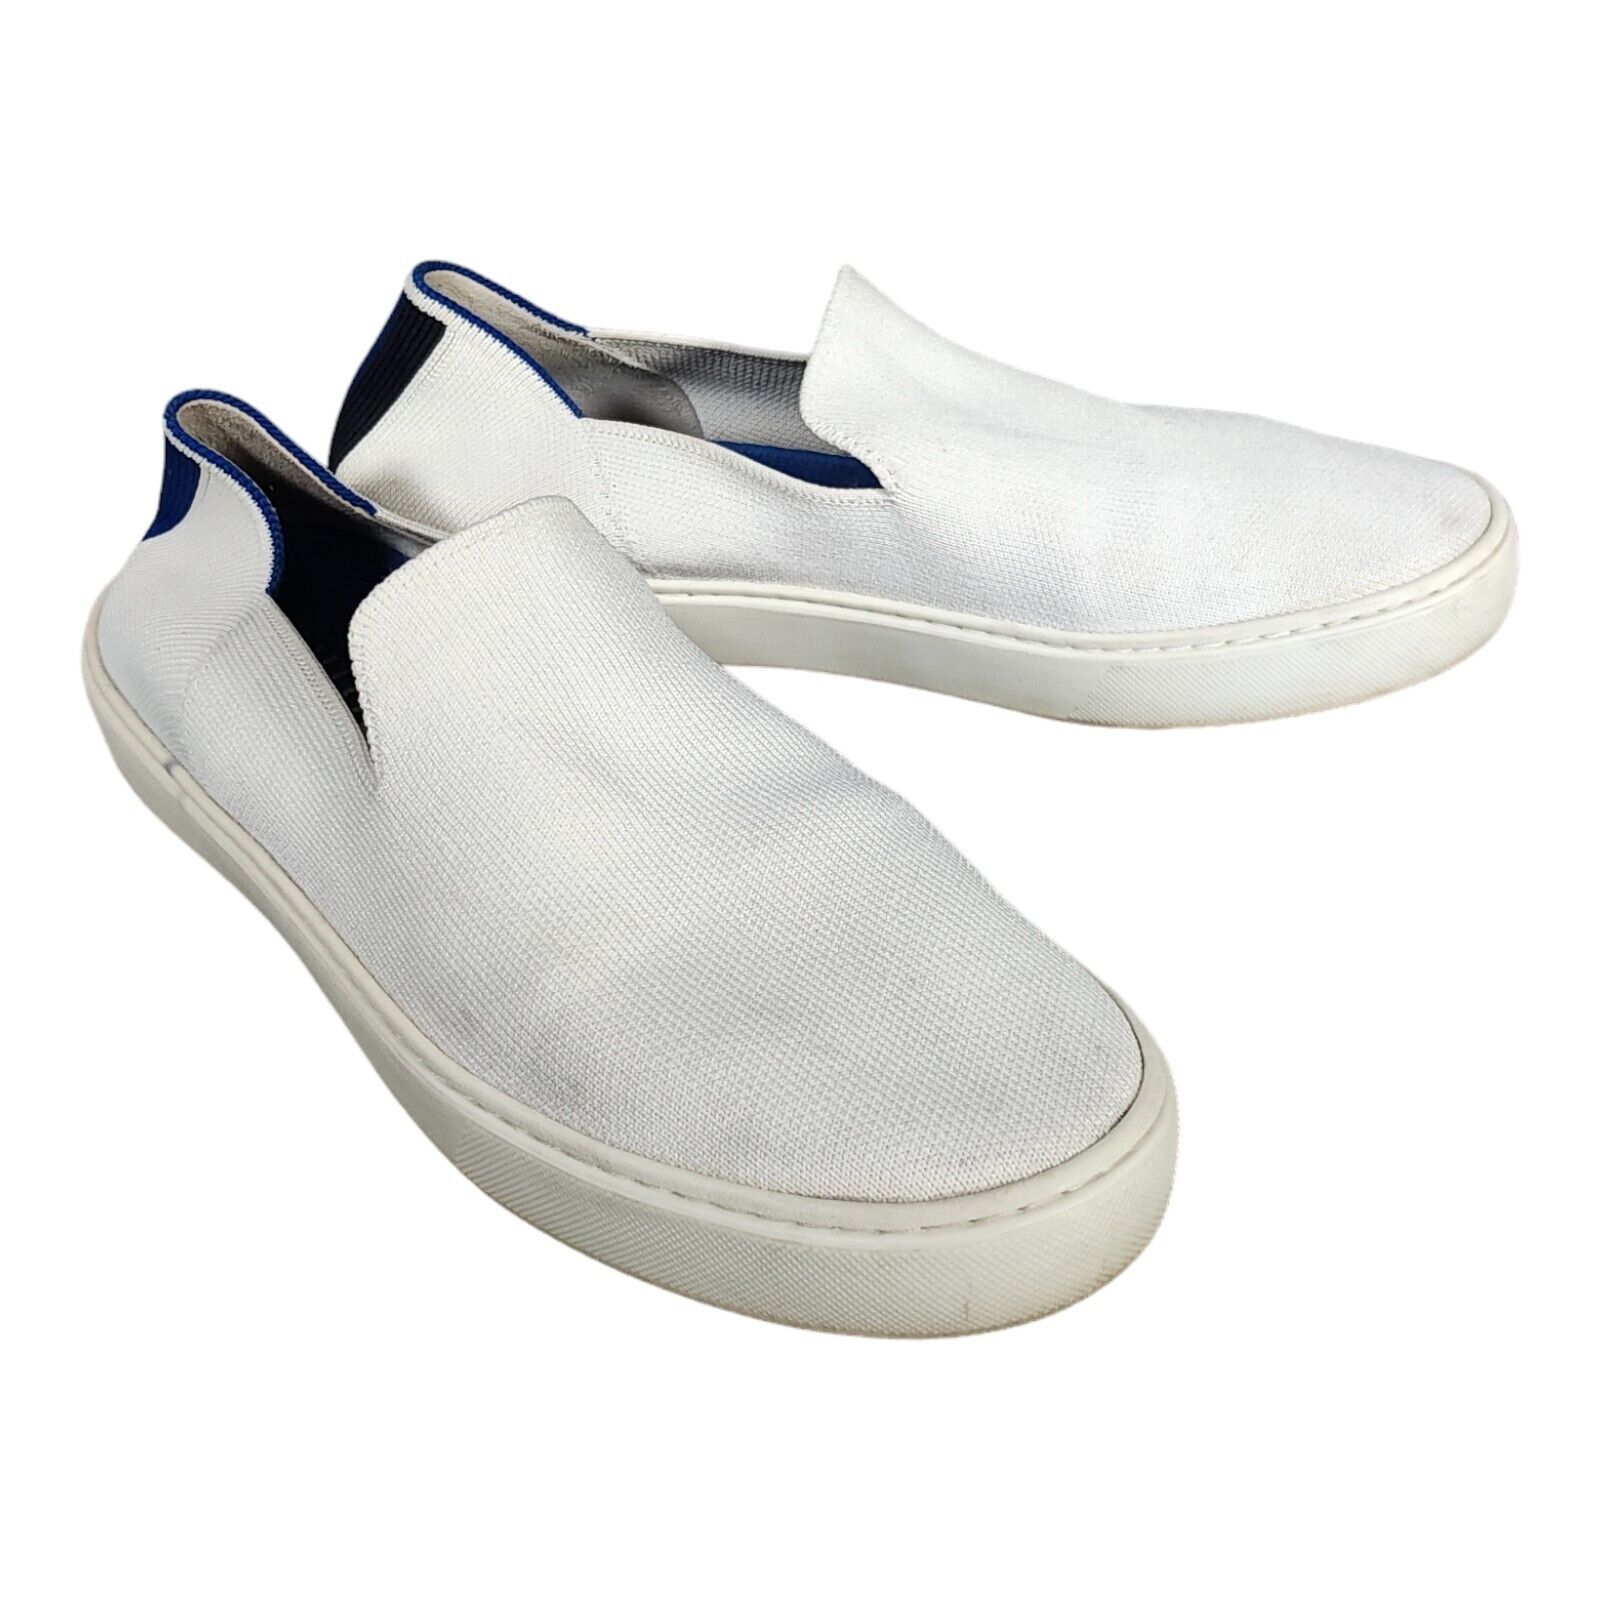 Rothy’s Slip-on Loafers - Women's Comfort Shoes -… - image 1